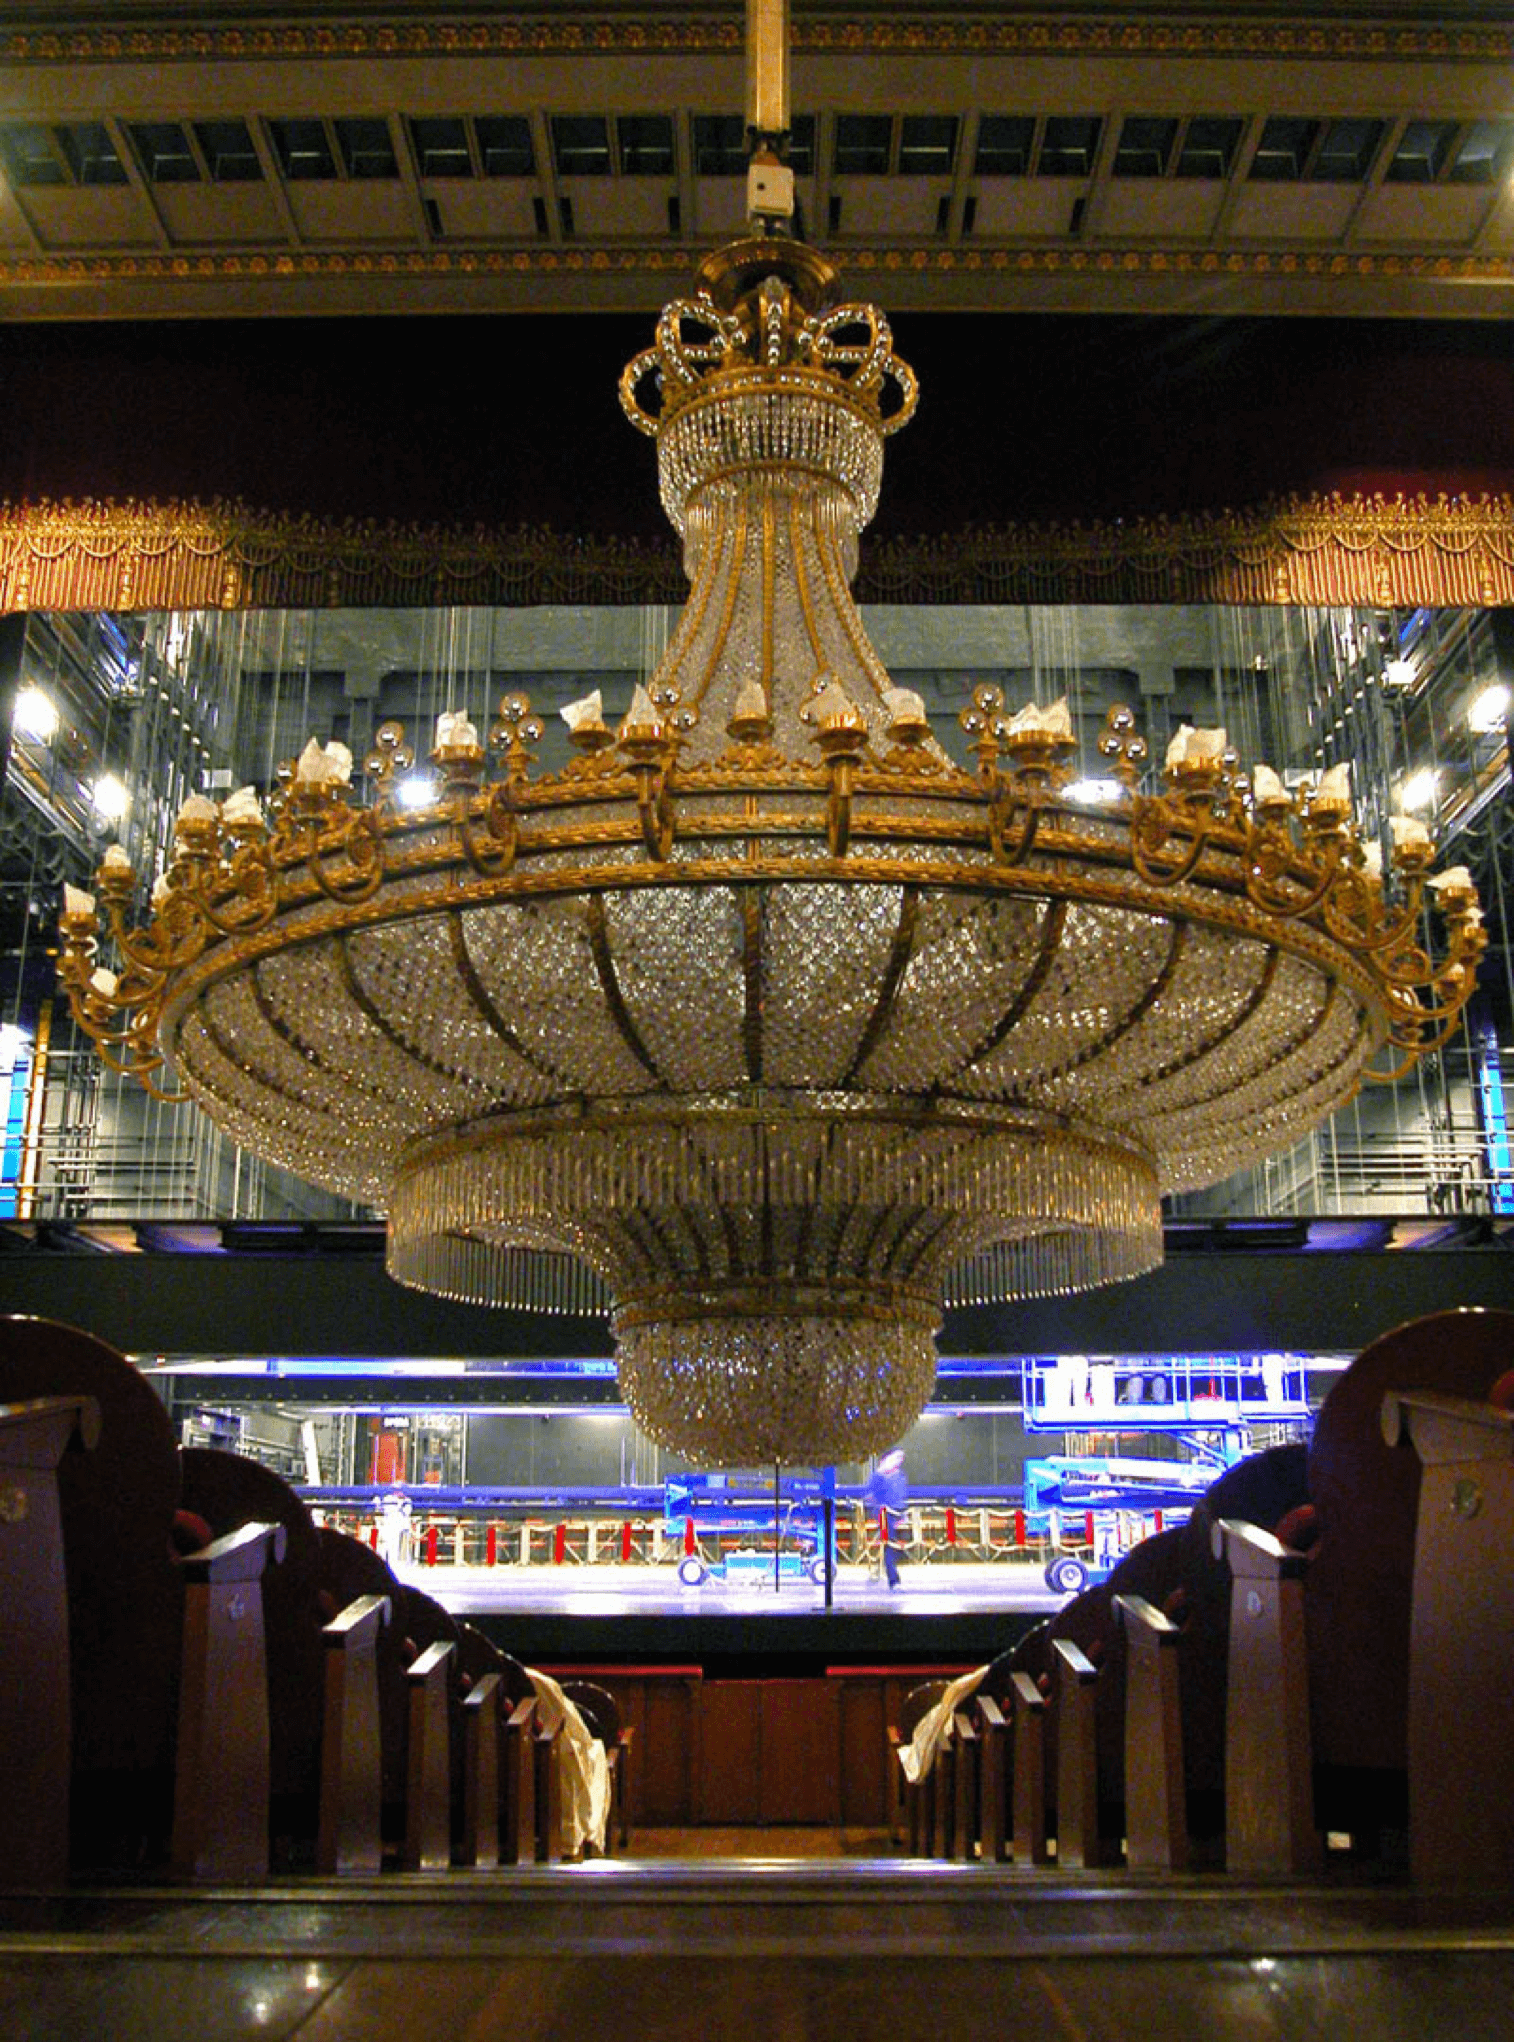 Royal theatre chandelier from the side